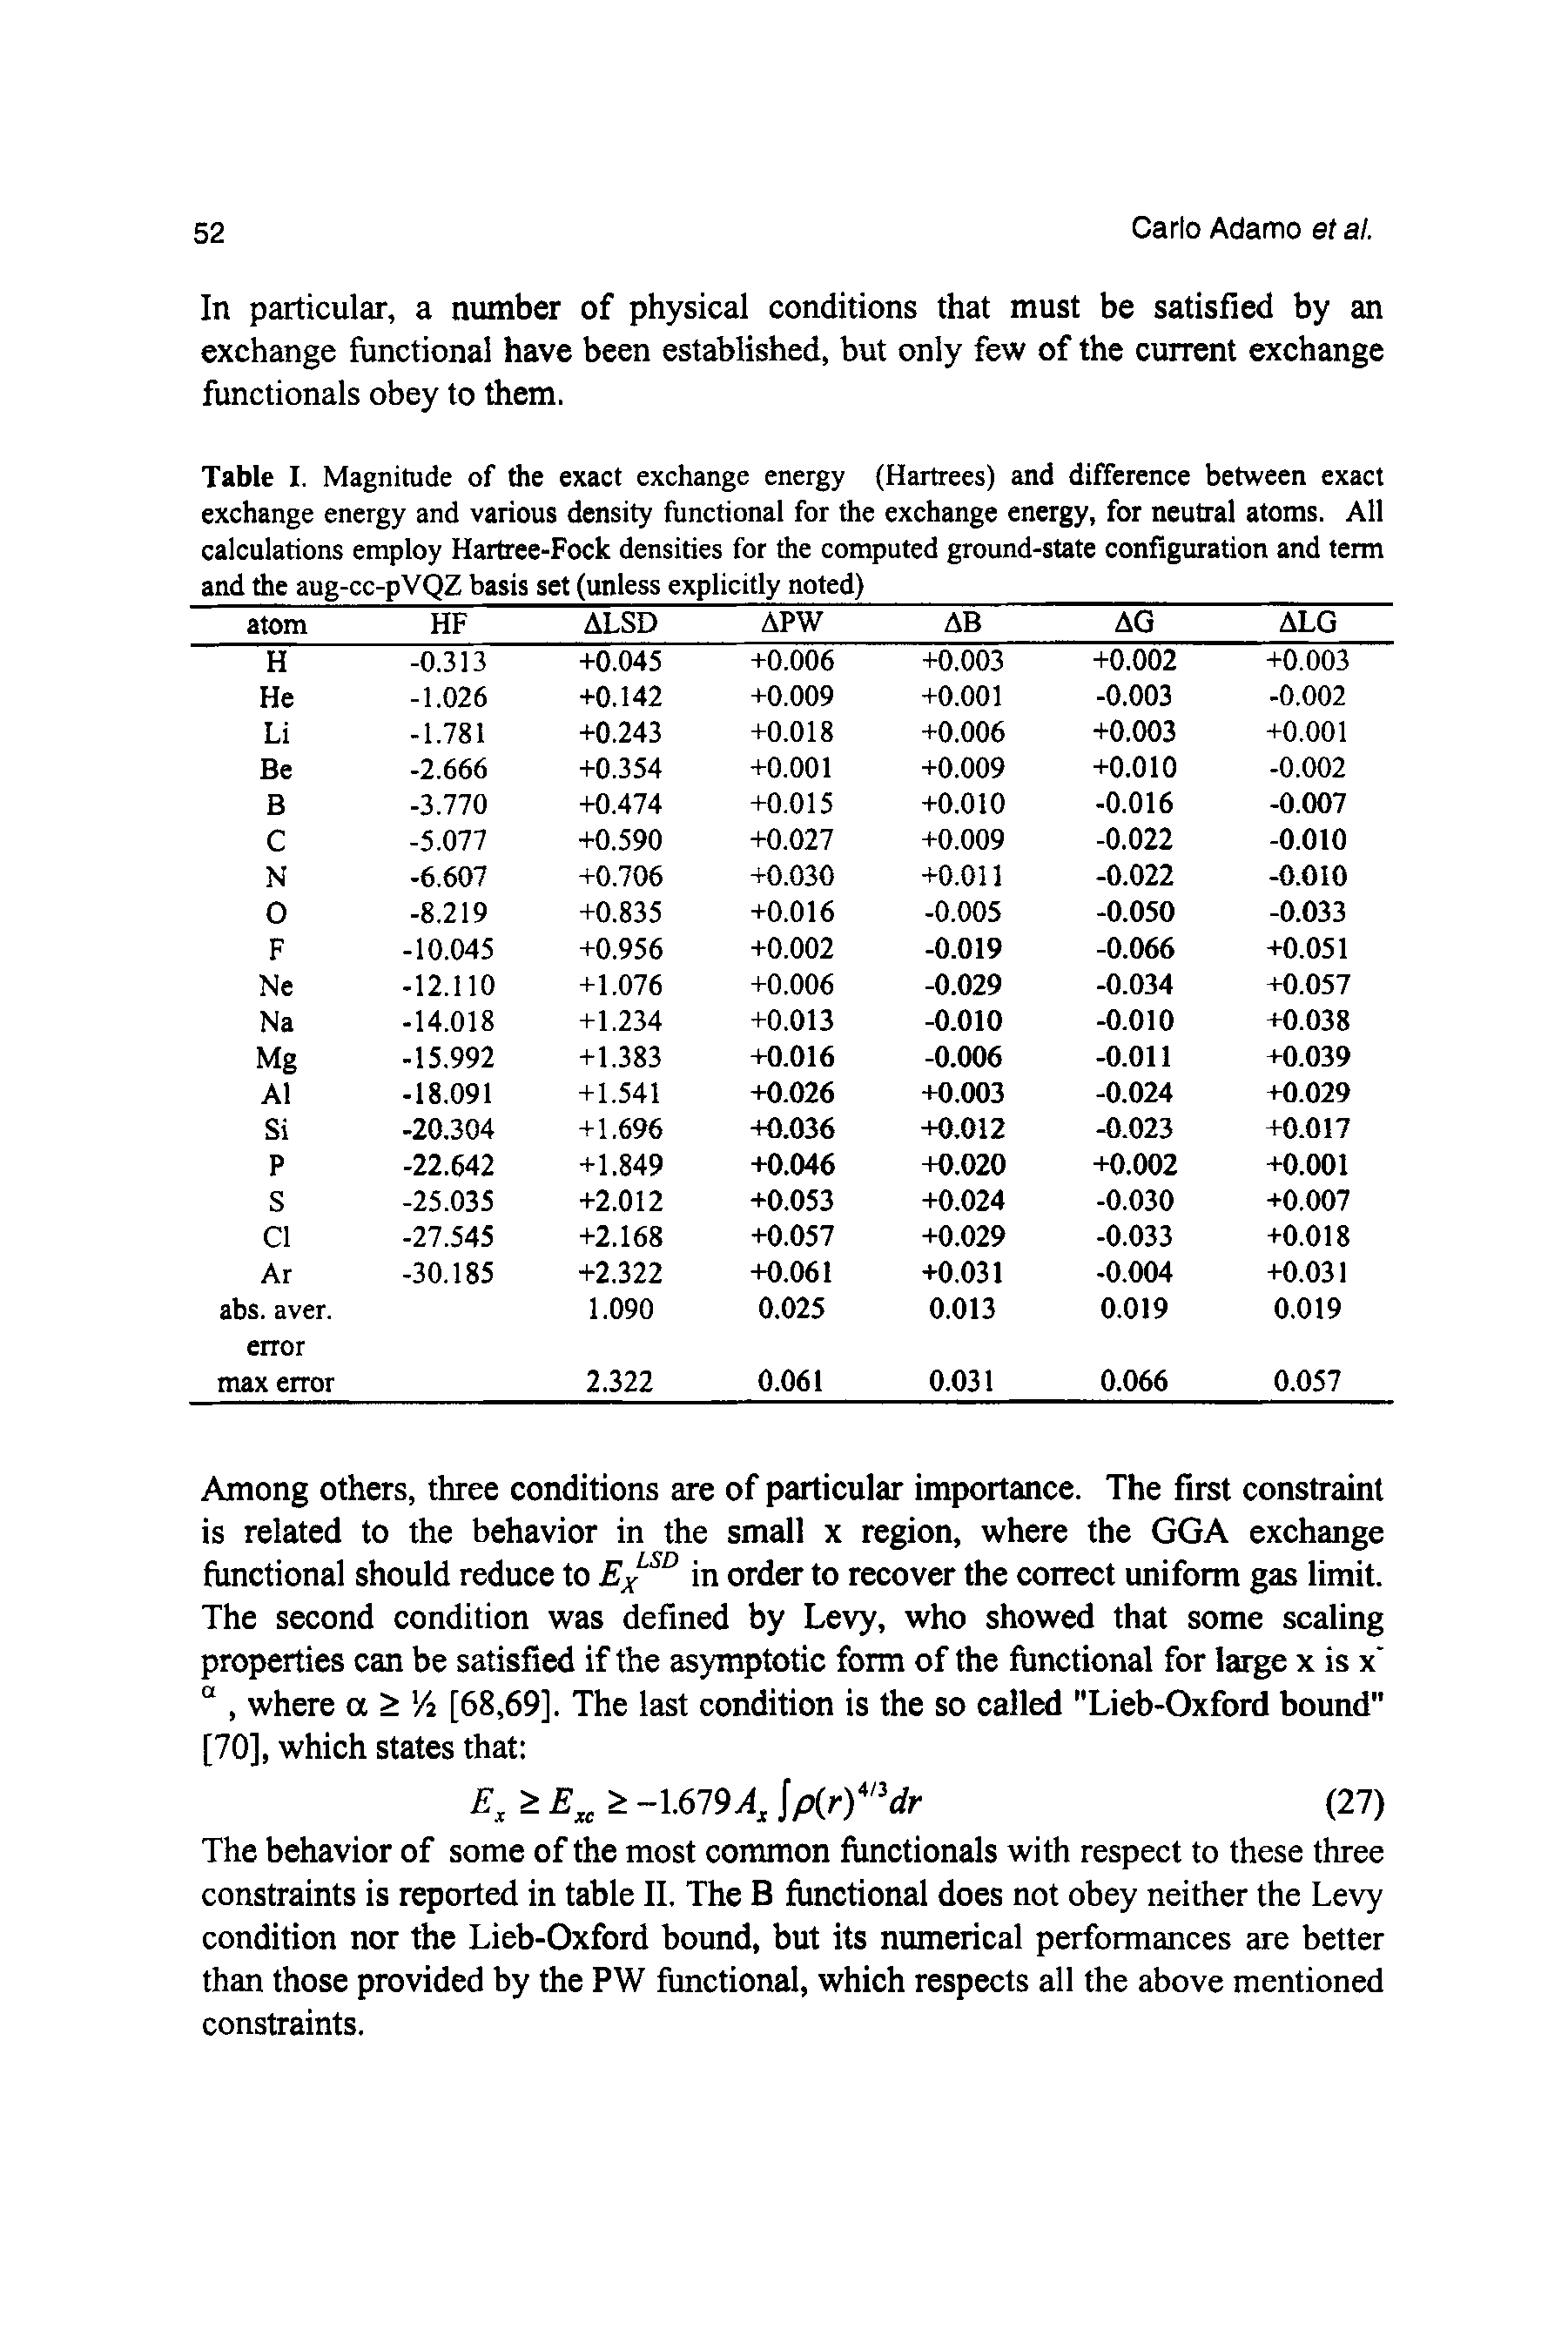 Table I. Magnitude of the exact exchange energy (Hartrees) and difference between exact exchange energy and various density functional for the exchange energy, for neutral atoms. All calculations employ Hartree-Fock densities for the computed ground-state configuration and term...